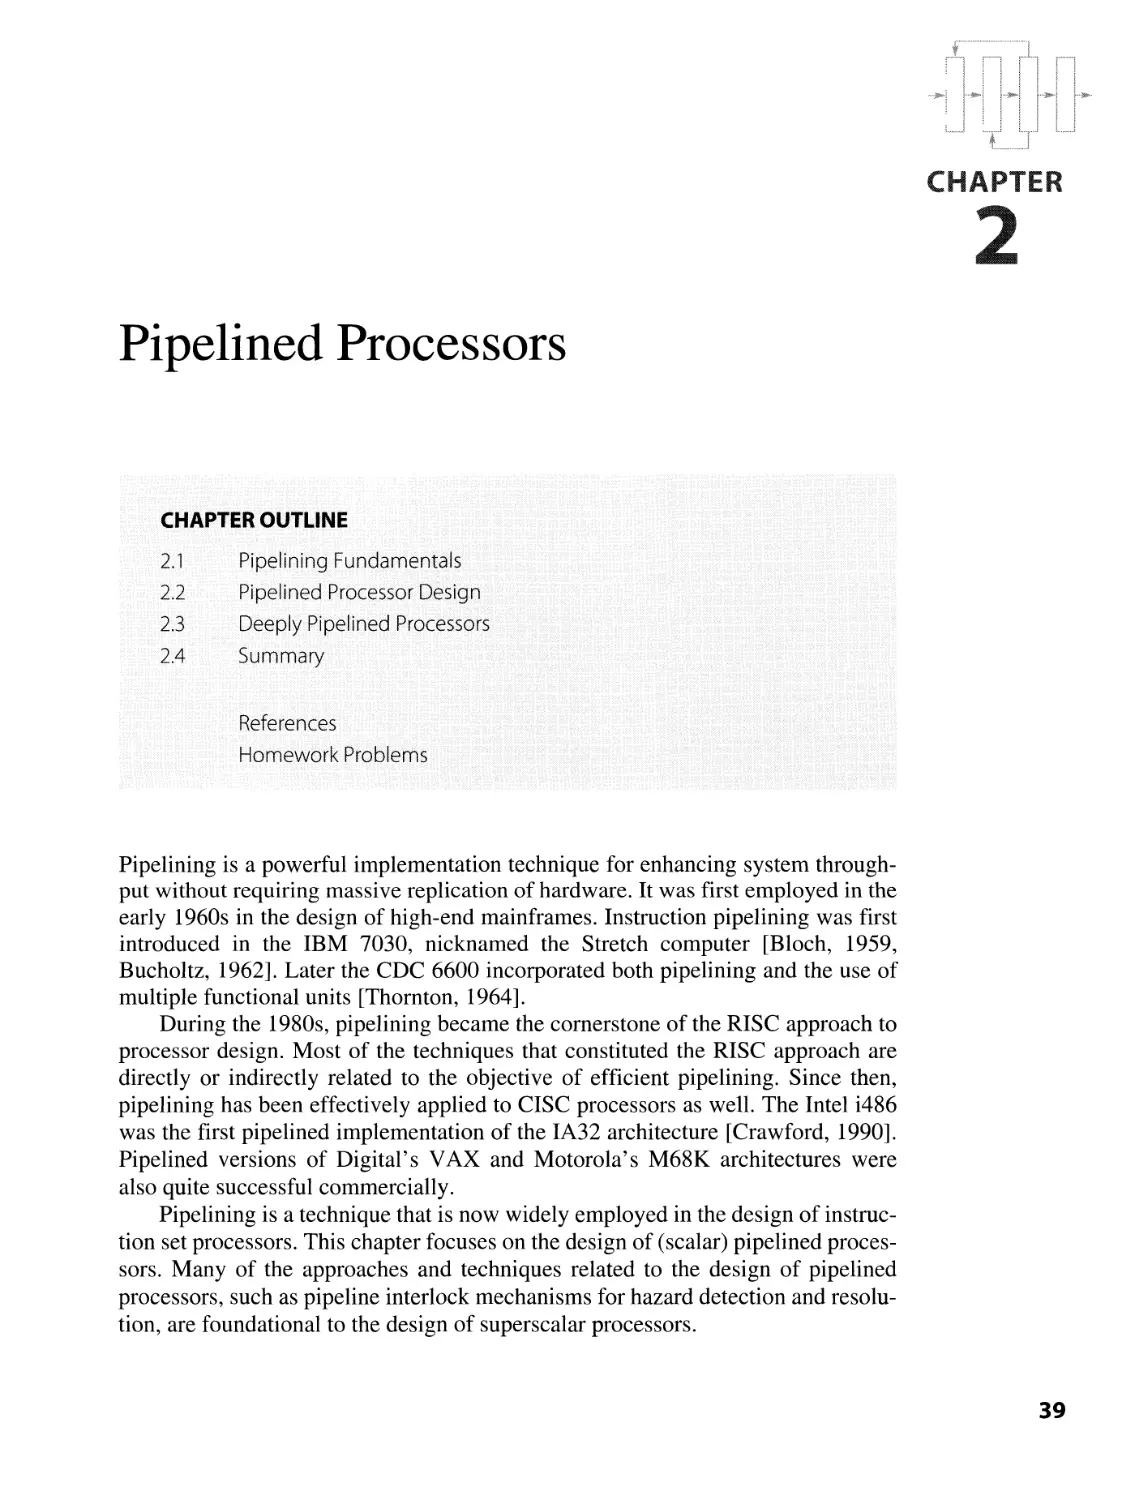 2. Pipelined Processors